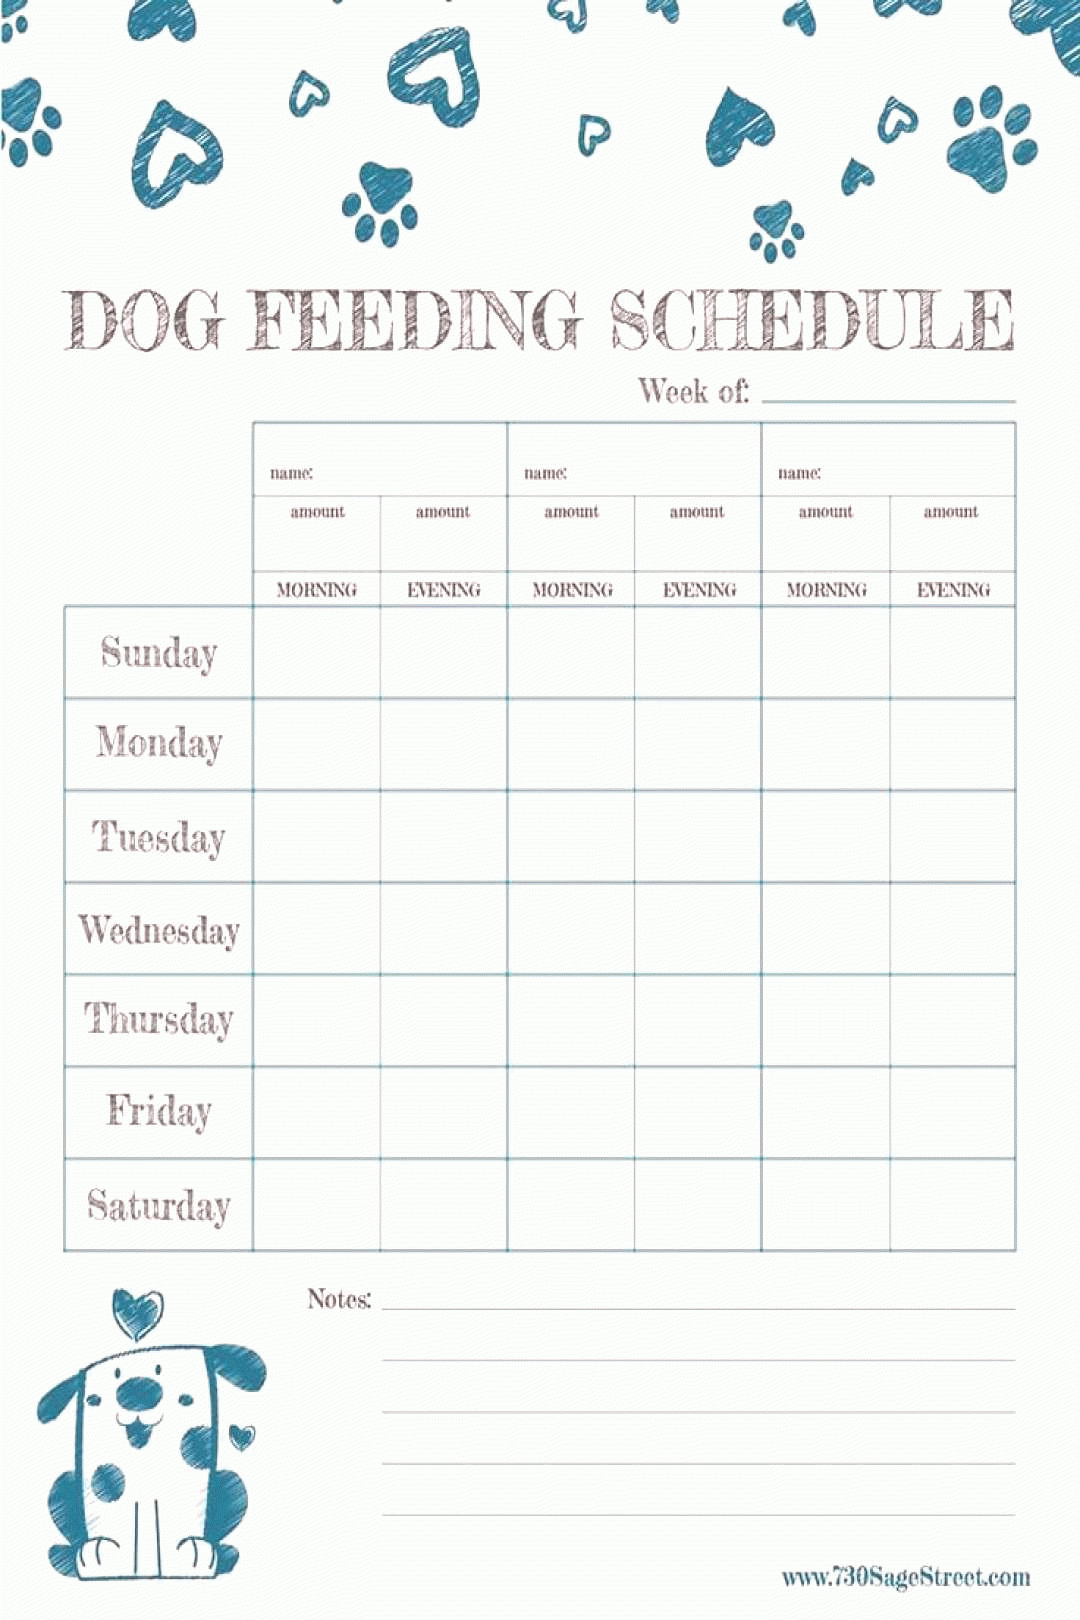 Free Printable Feeding Schedule To Track Your Dogs Food 